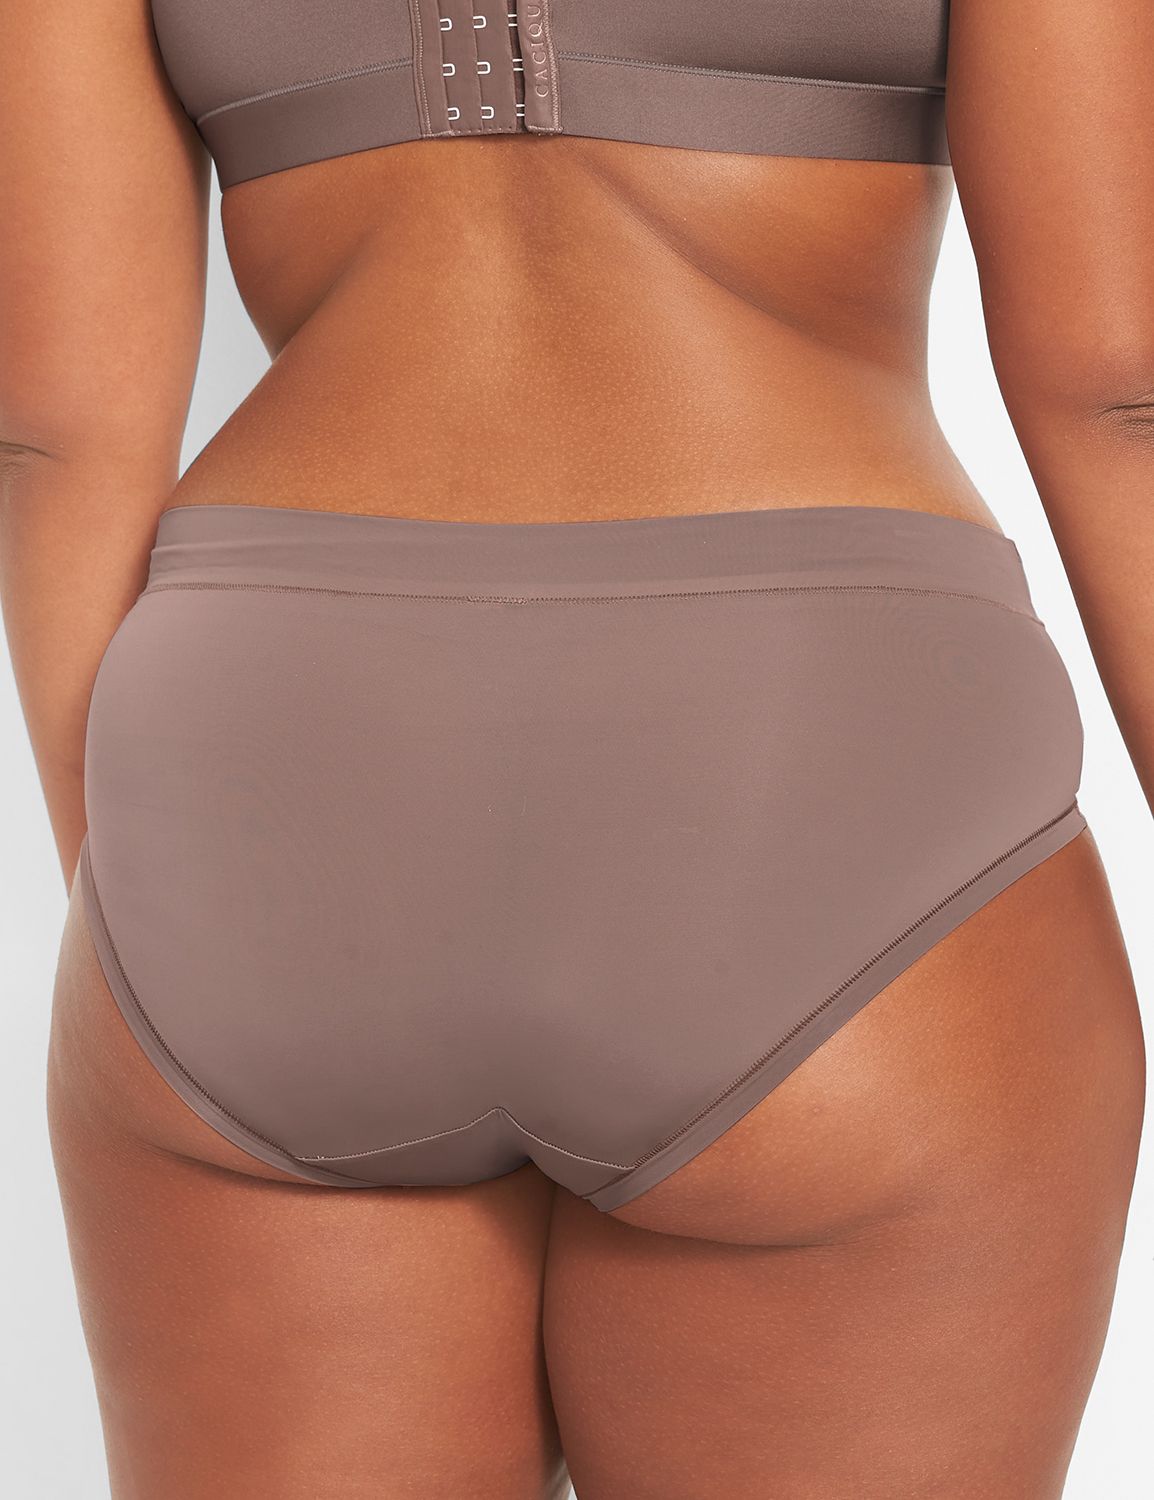 Total booty bliss is HERE (& it's on sale). - Cacique